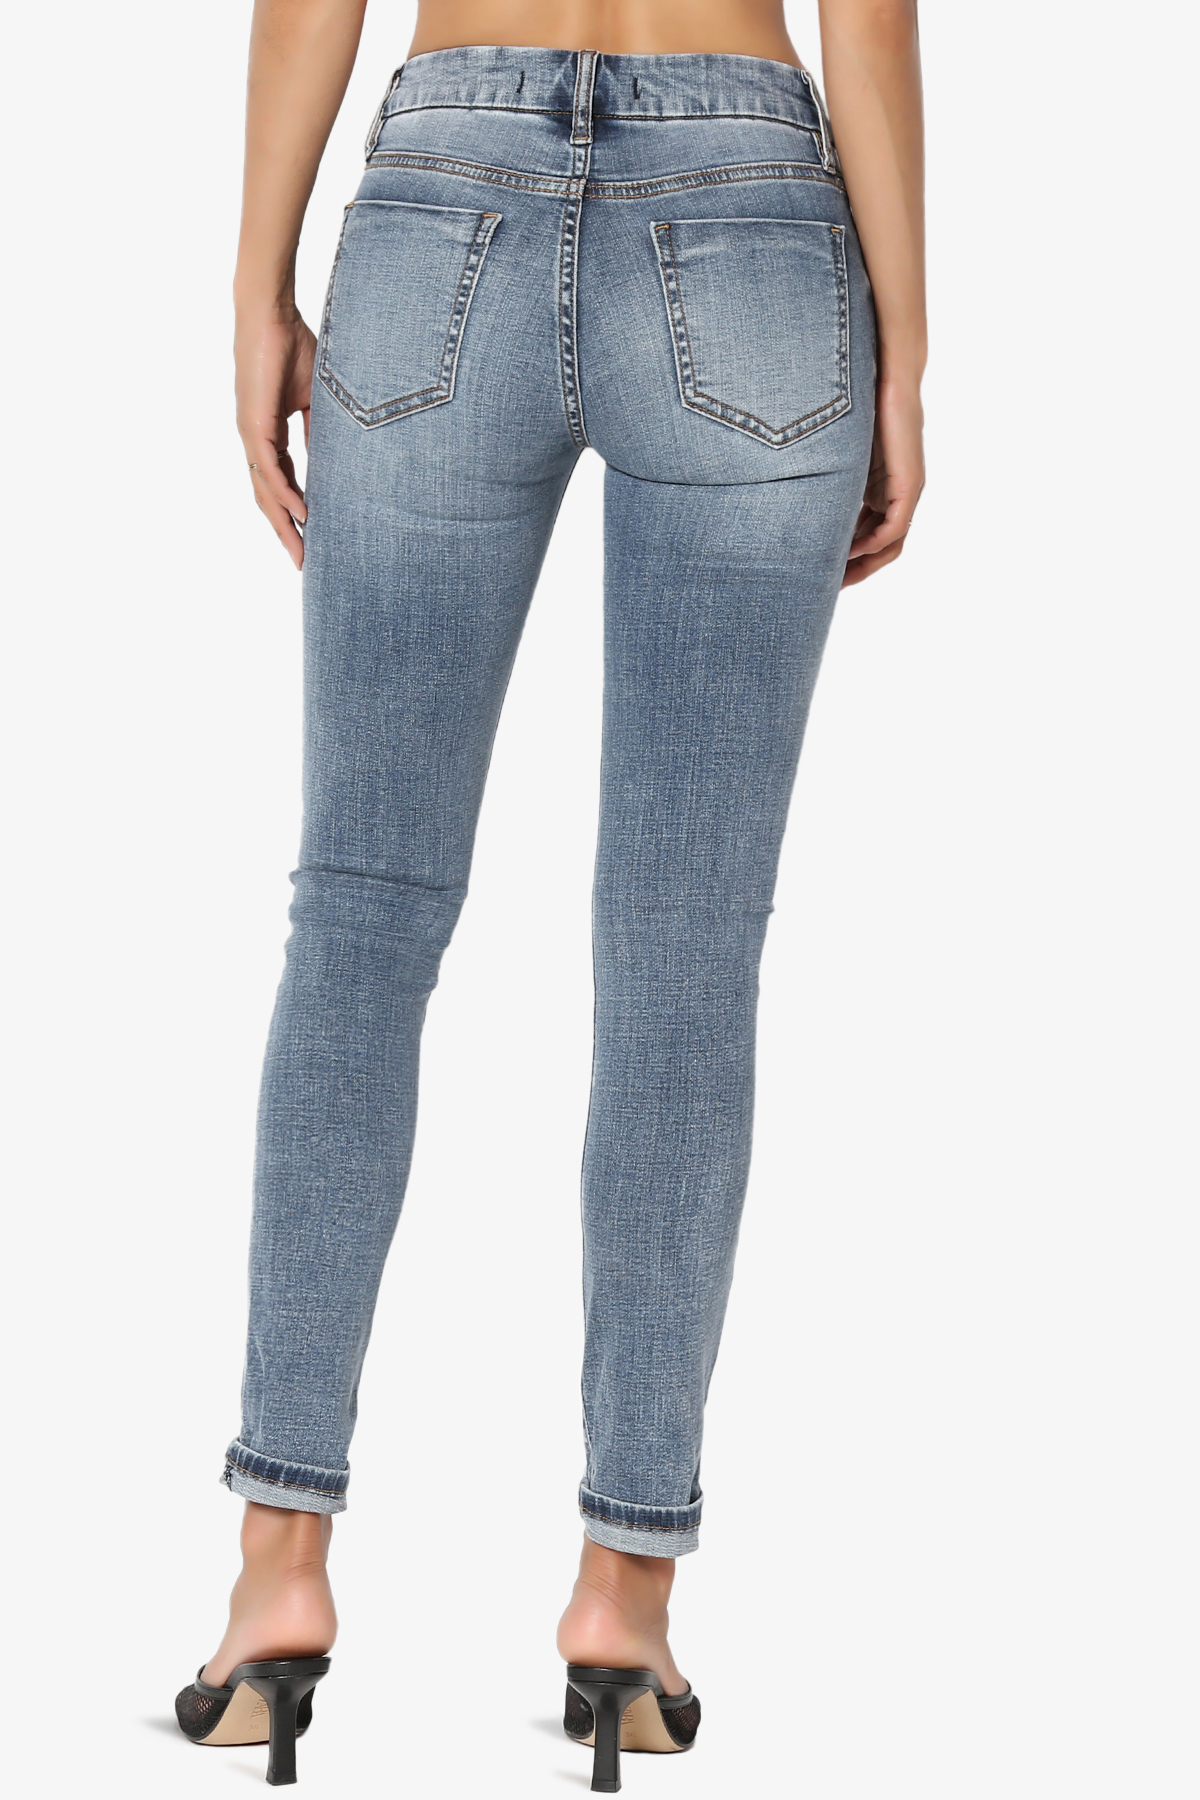 TheMogan Women's 0~3X Roll Up Mid Rise Med Vintage Wash Tencel Denim Skinny Jeans - image 2 of 7